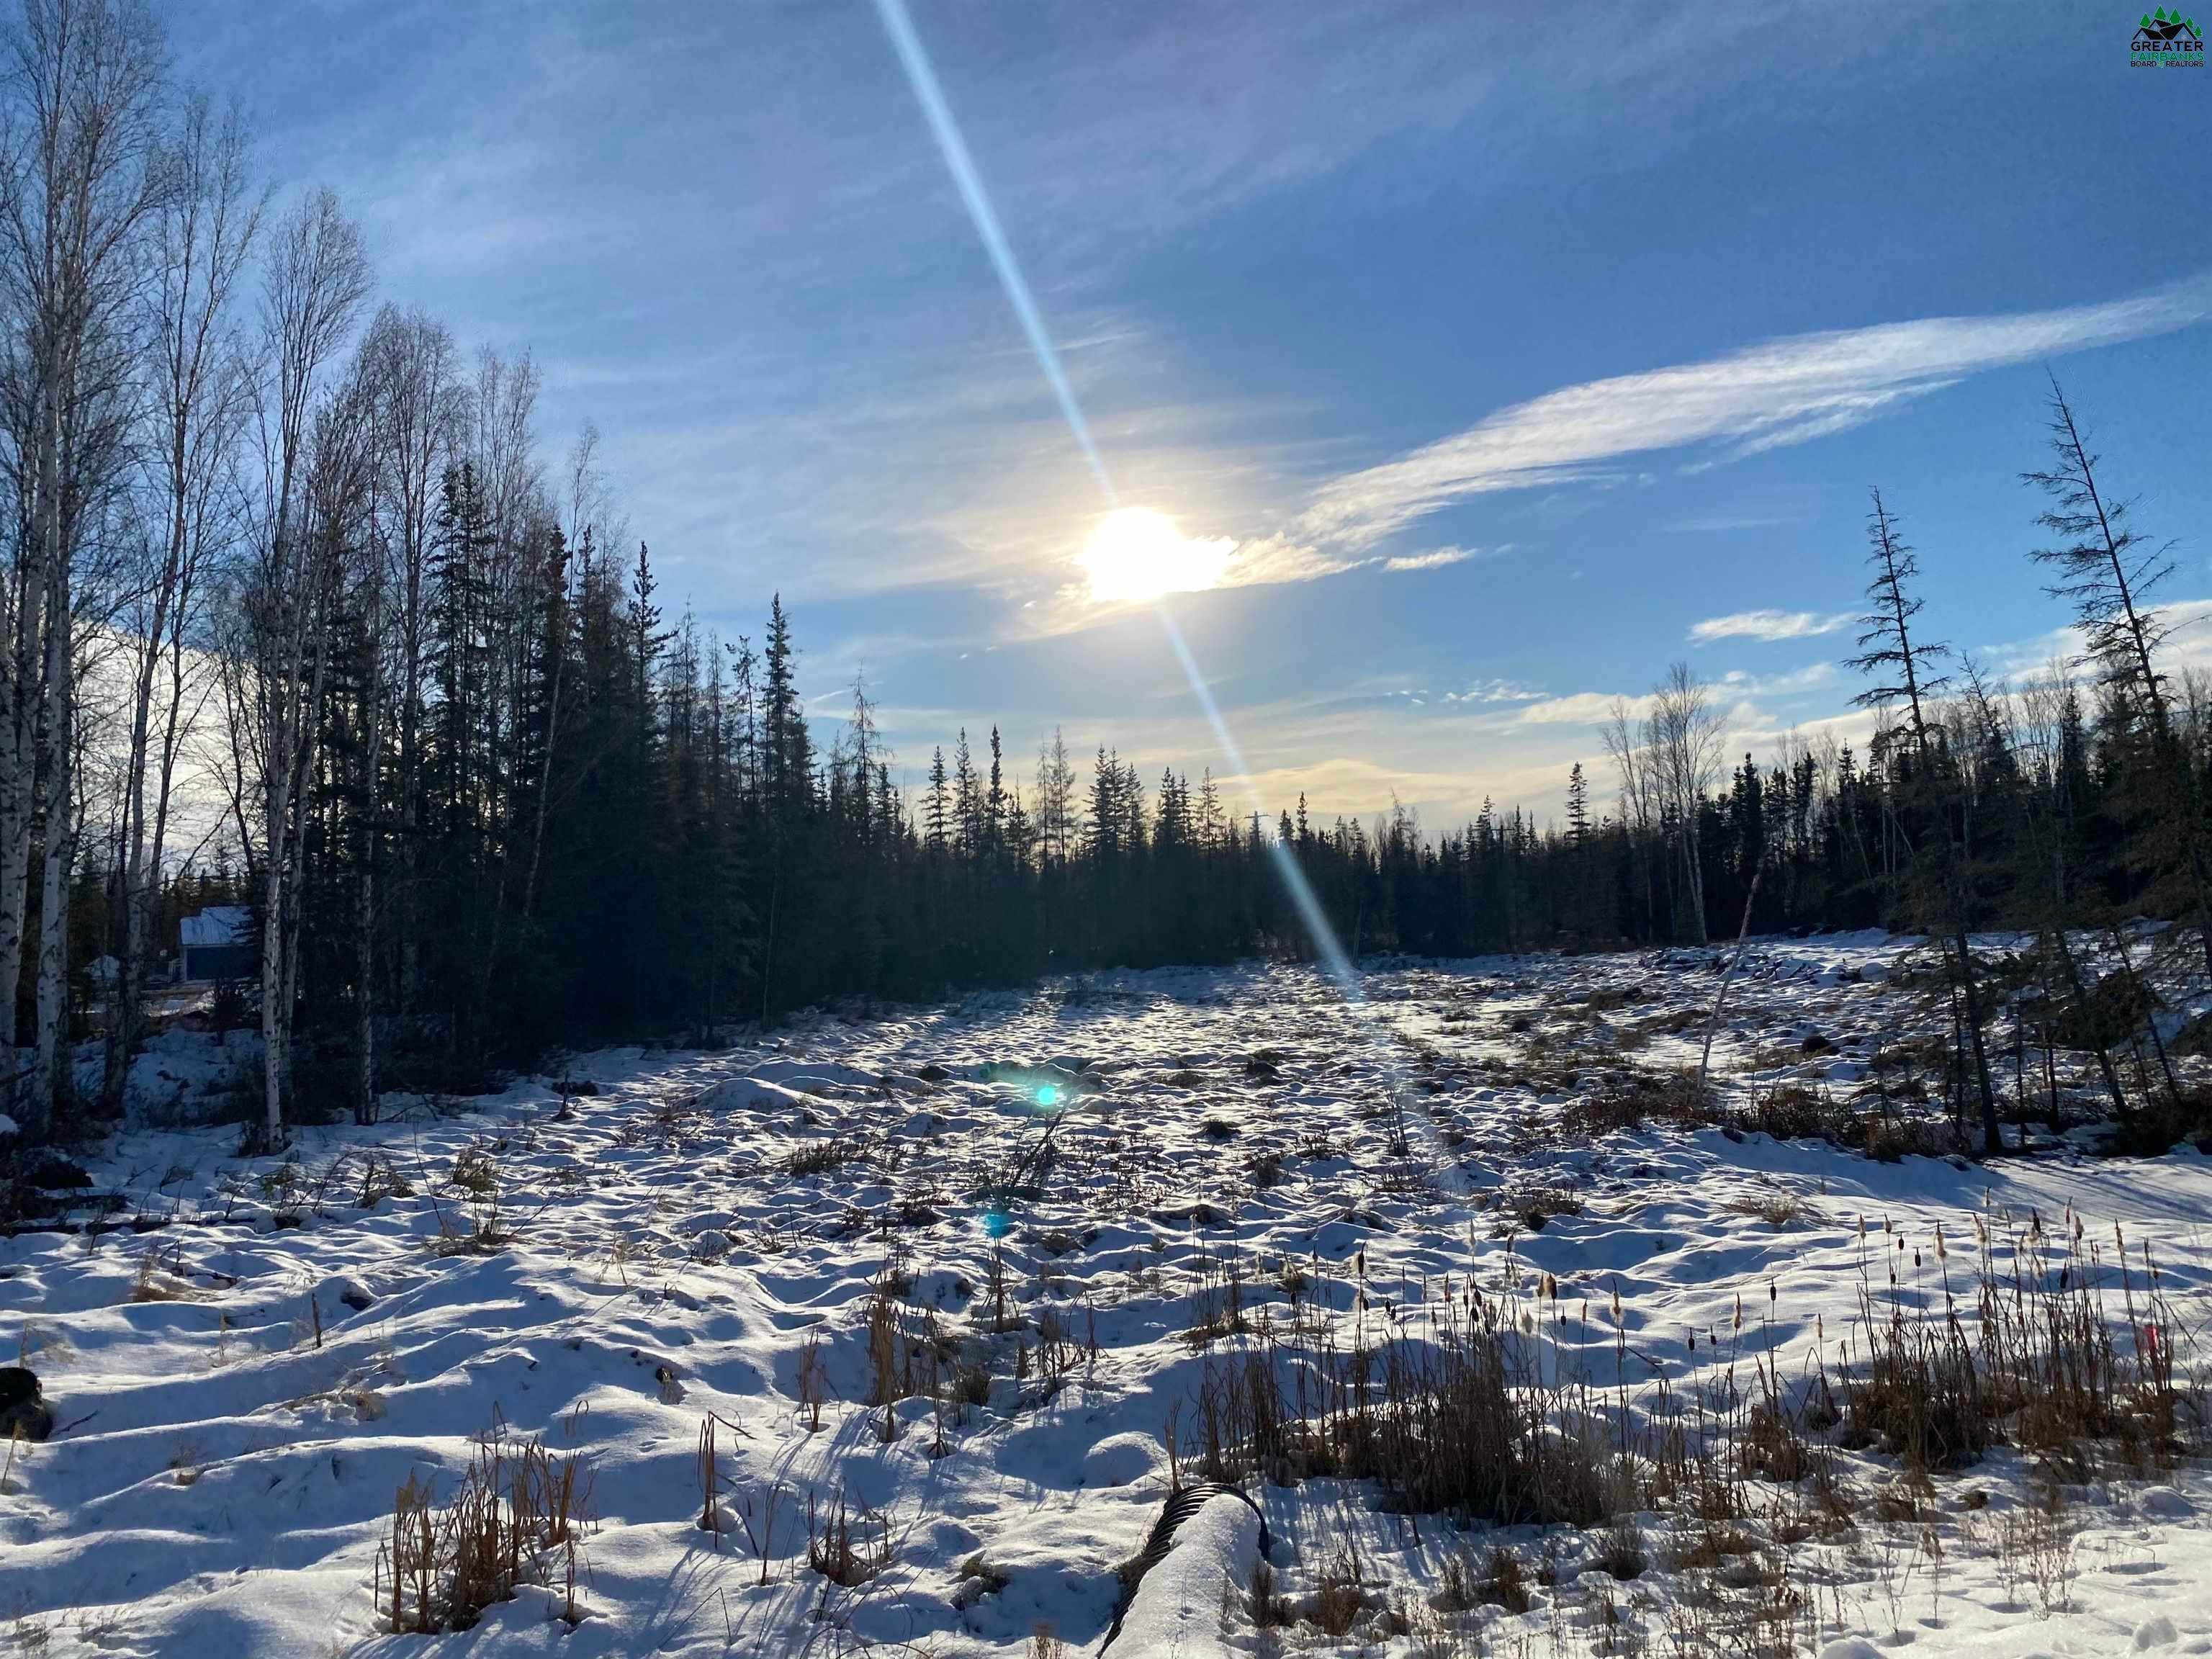 3. Residential for Sale at L17 DALLAS DRIVE North Pole, Alaska 99705 United States